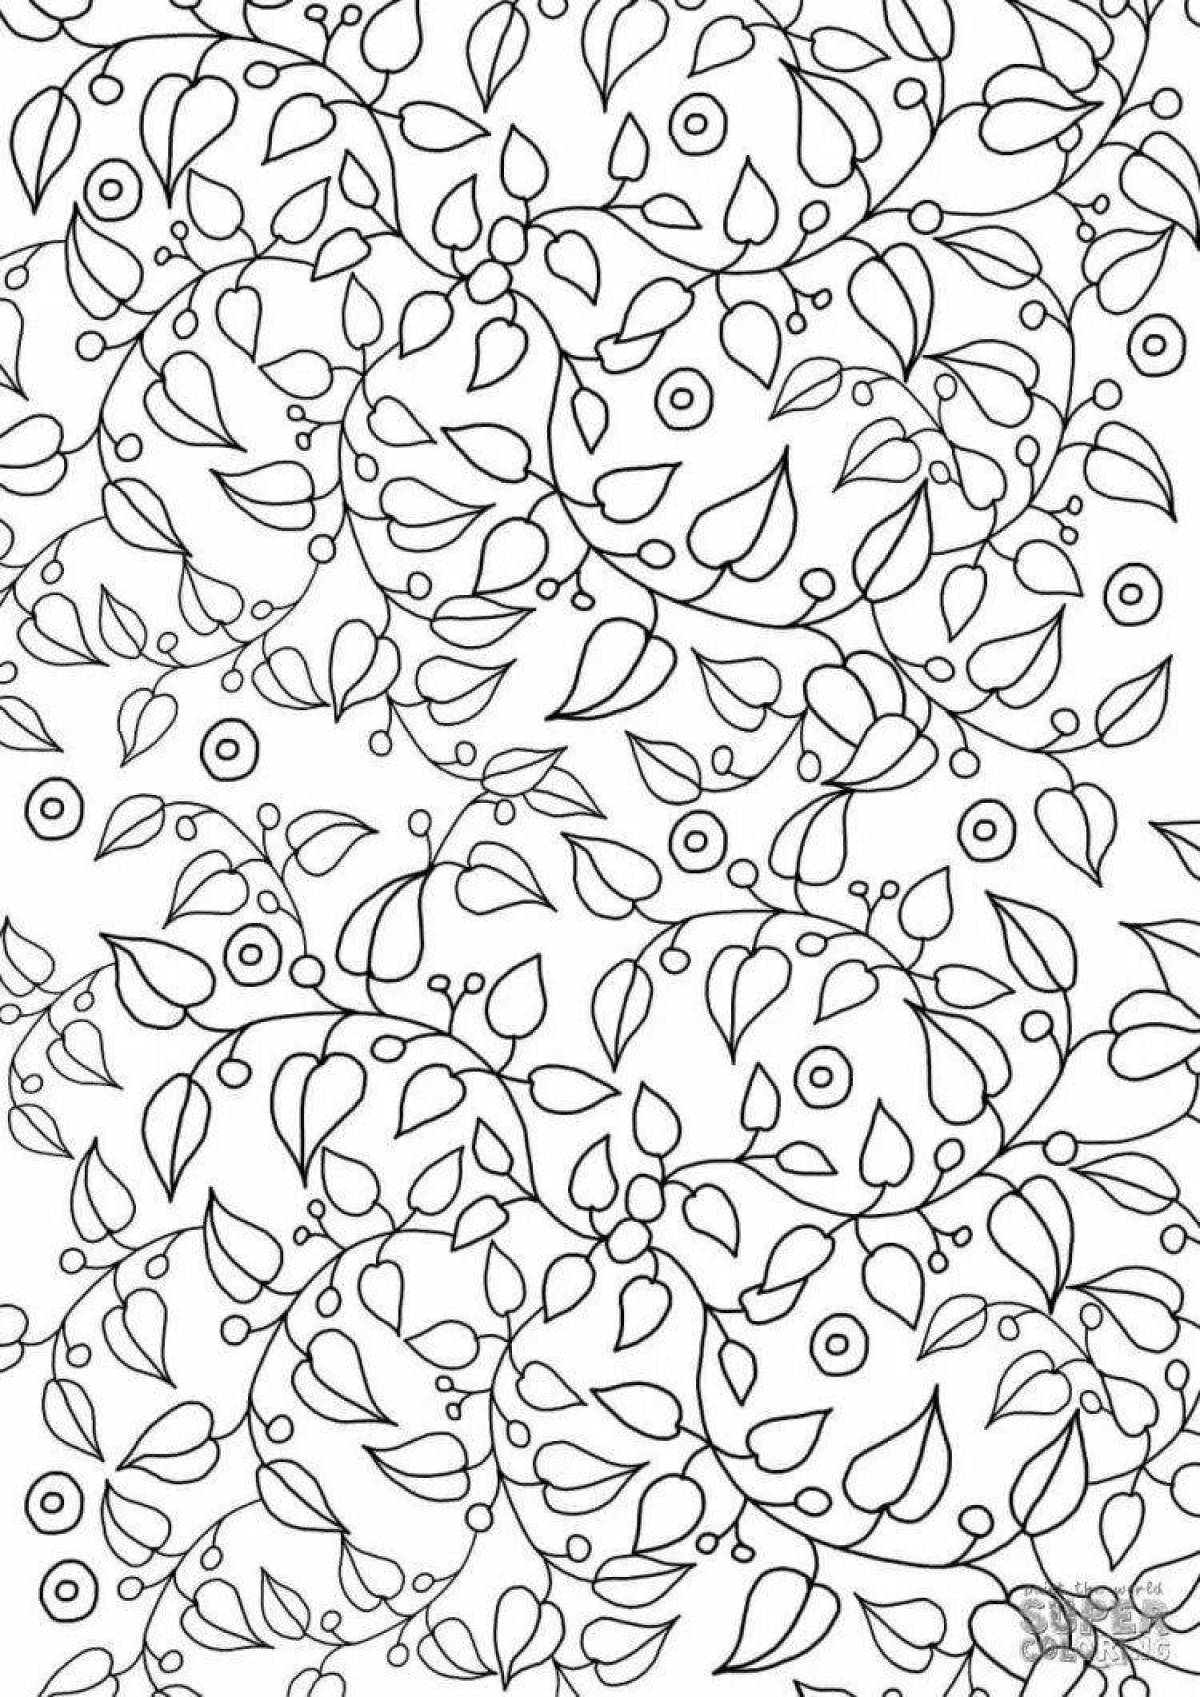 Ornate coloring templates